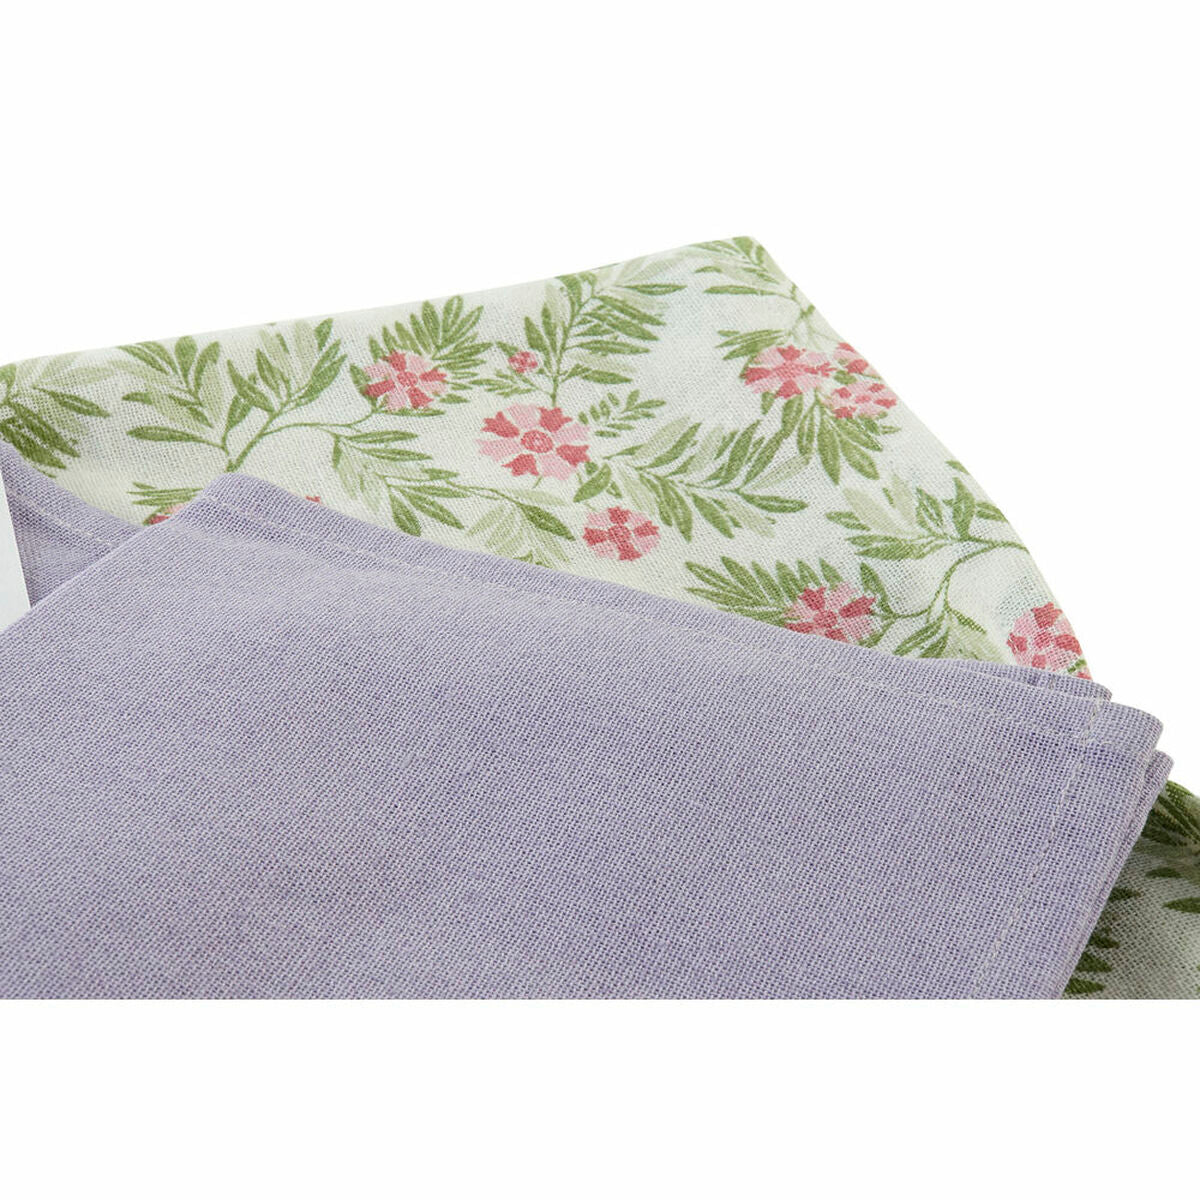 Tablecloth and napkins DKD Home Decor White Green 150 x 150 x 0,5 cm